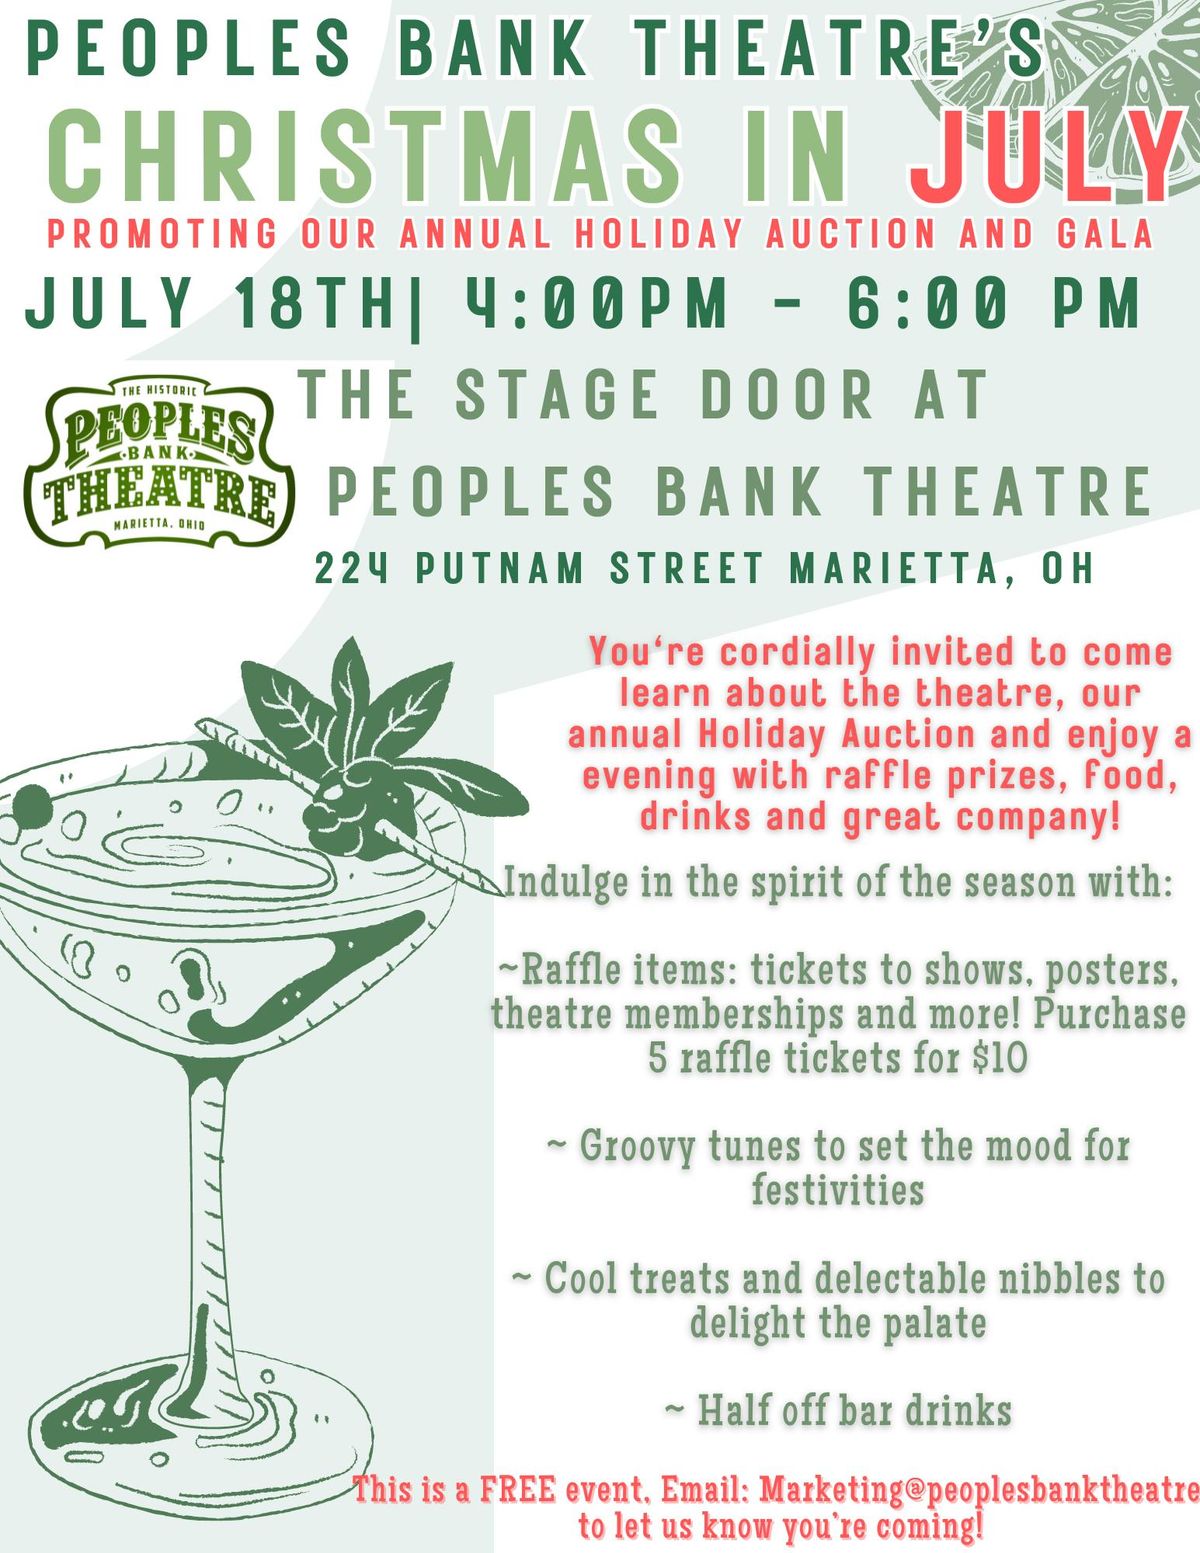 Peoples Bank Theatre's Christmas in July Fundraiser